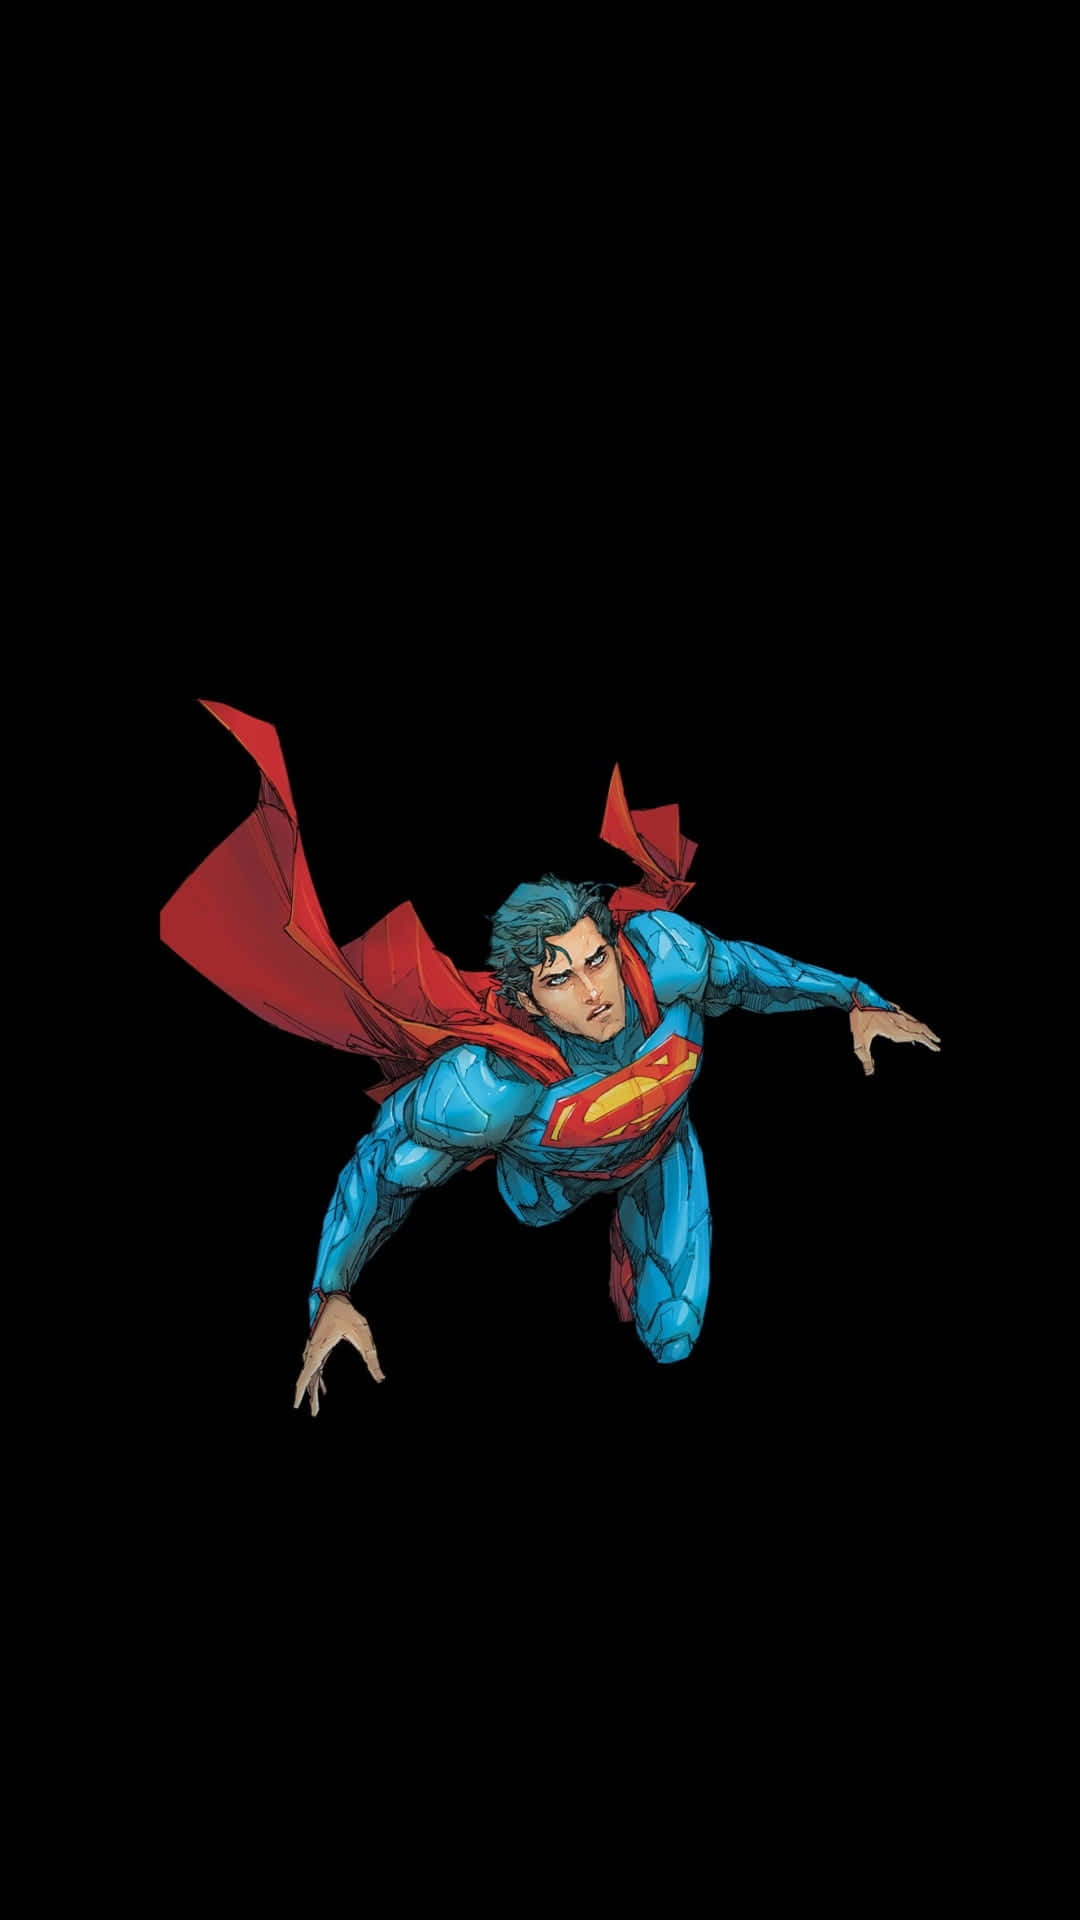 Superman Flying In The Air Wallpaper